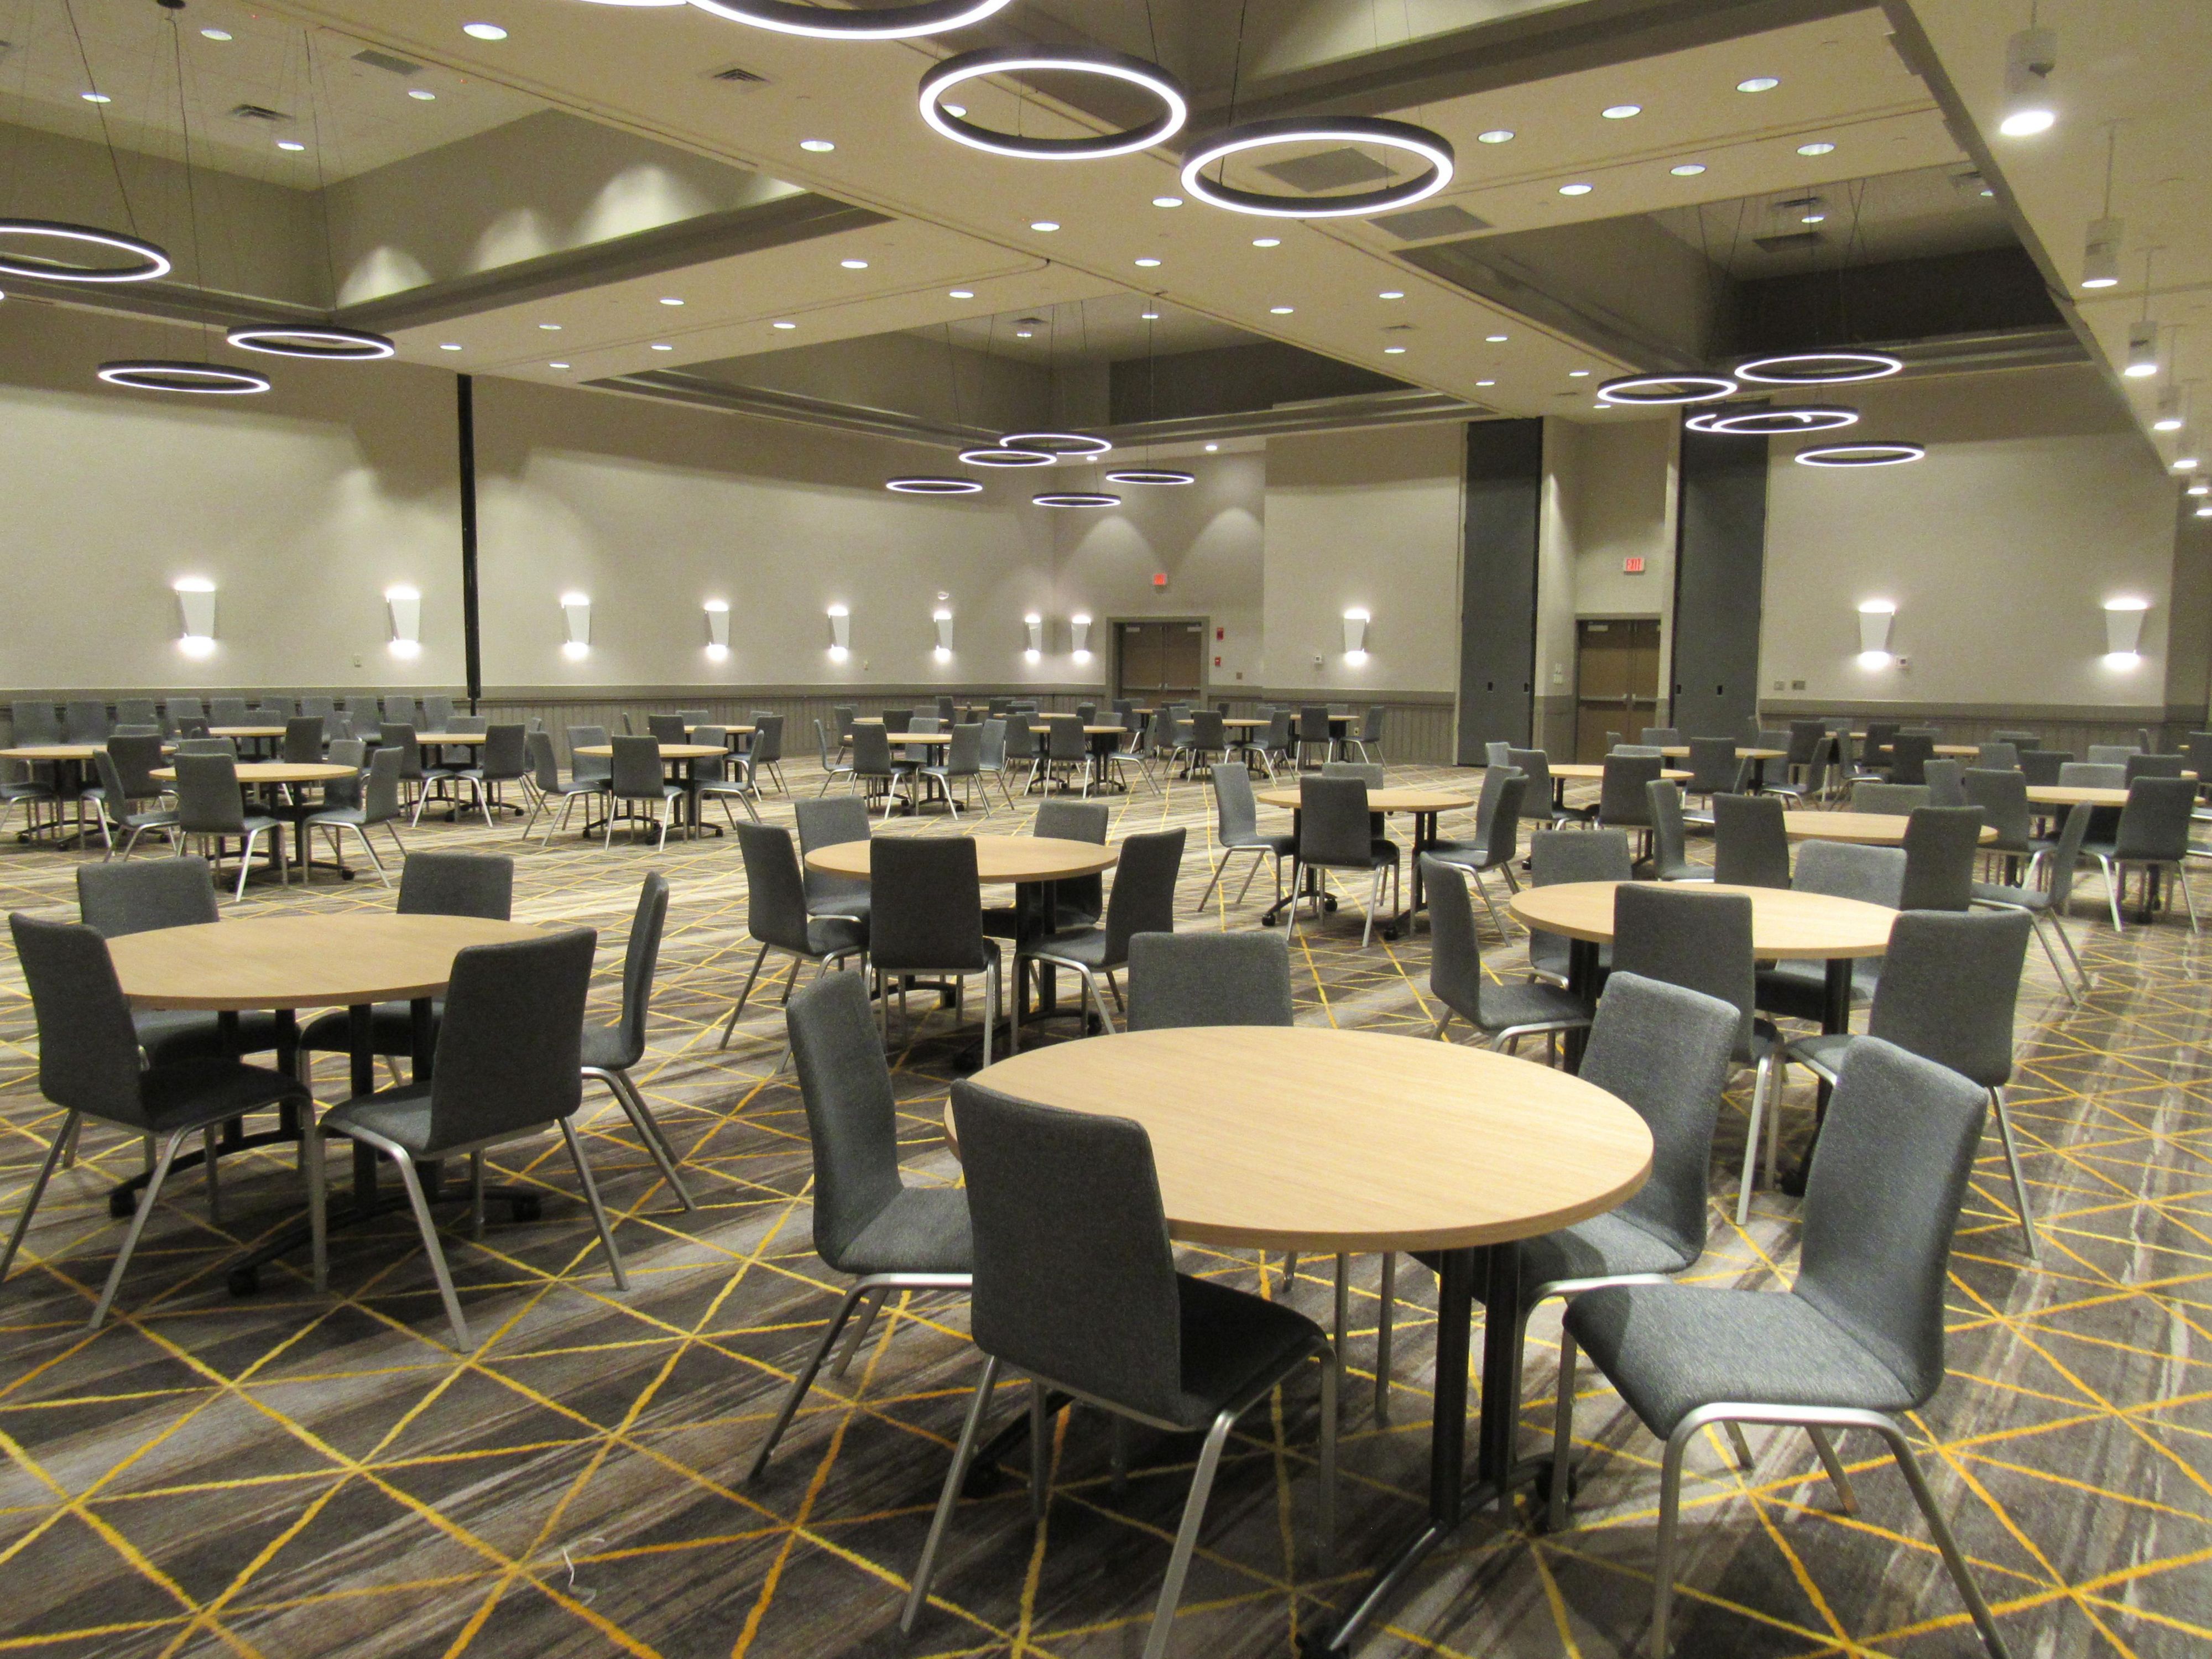 From business meetings to weddings and Quinceañeras, let us help you plan your event with style. With 5,000 square feet of flexible meeting space, we have everything you need to ensure your gathering is a complete success. Let our team help plan your Orlando events, from catering to audiovisual support.